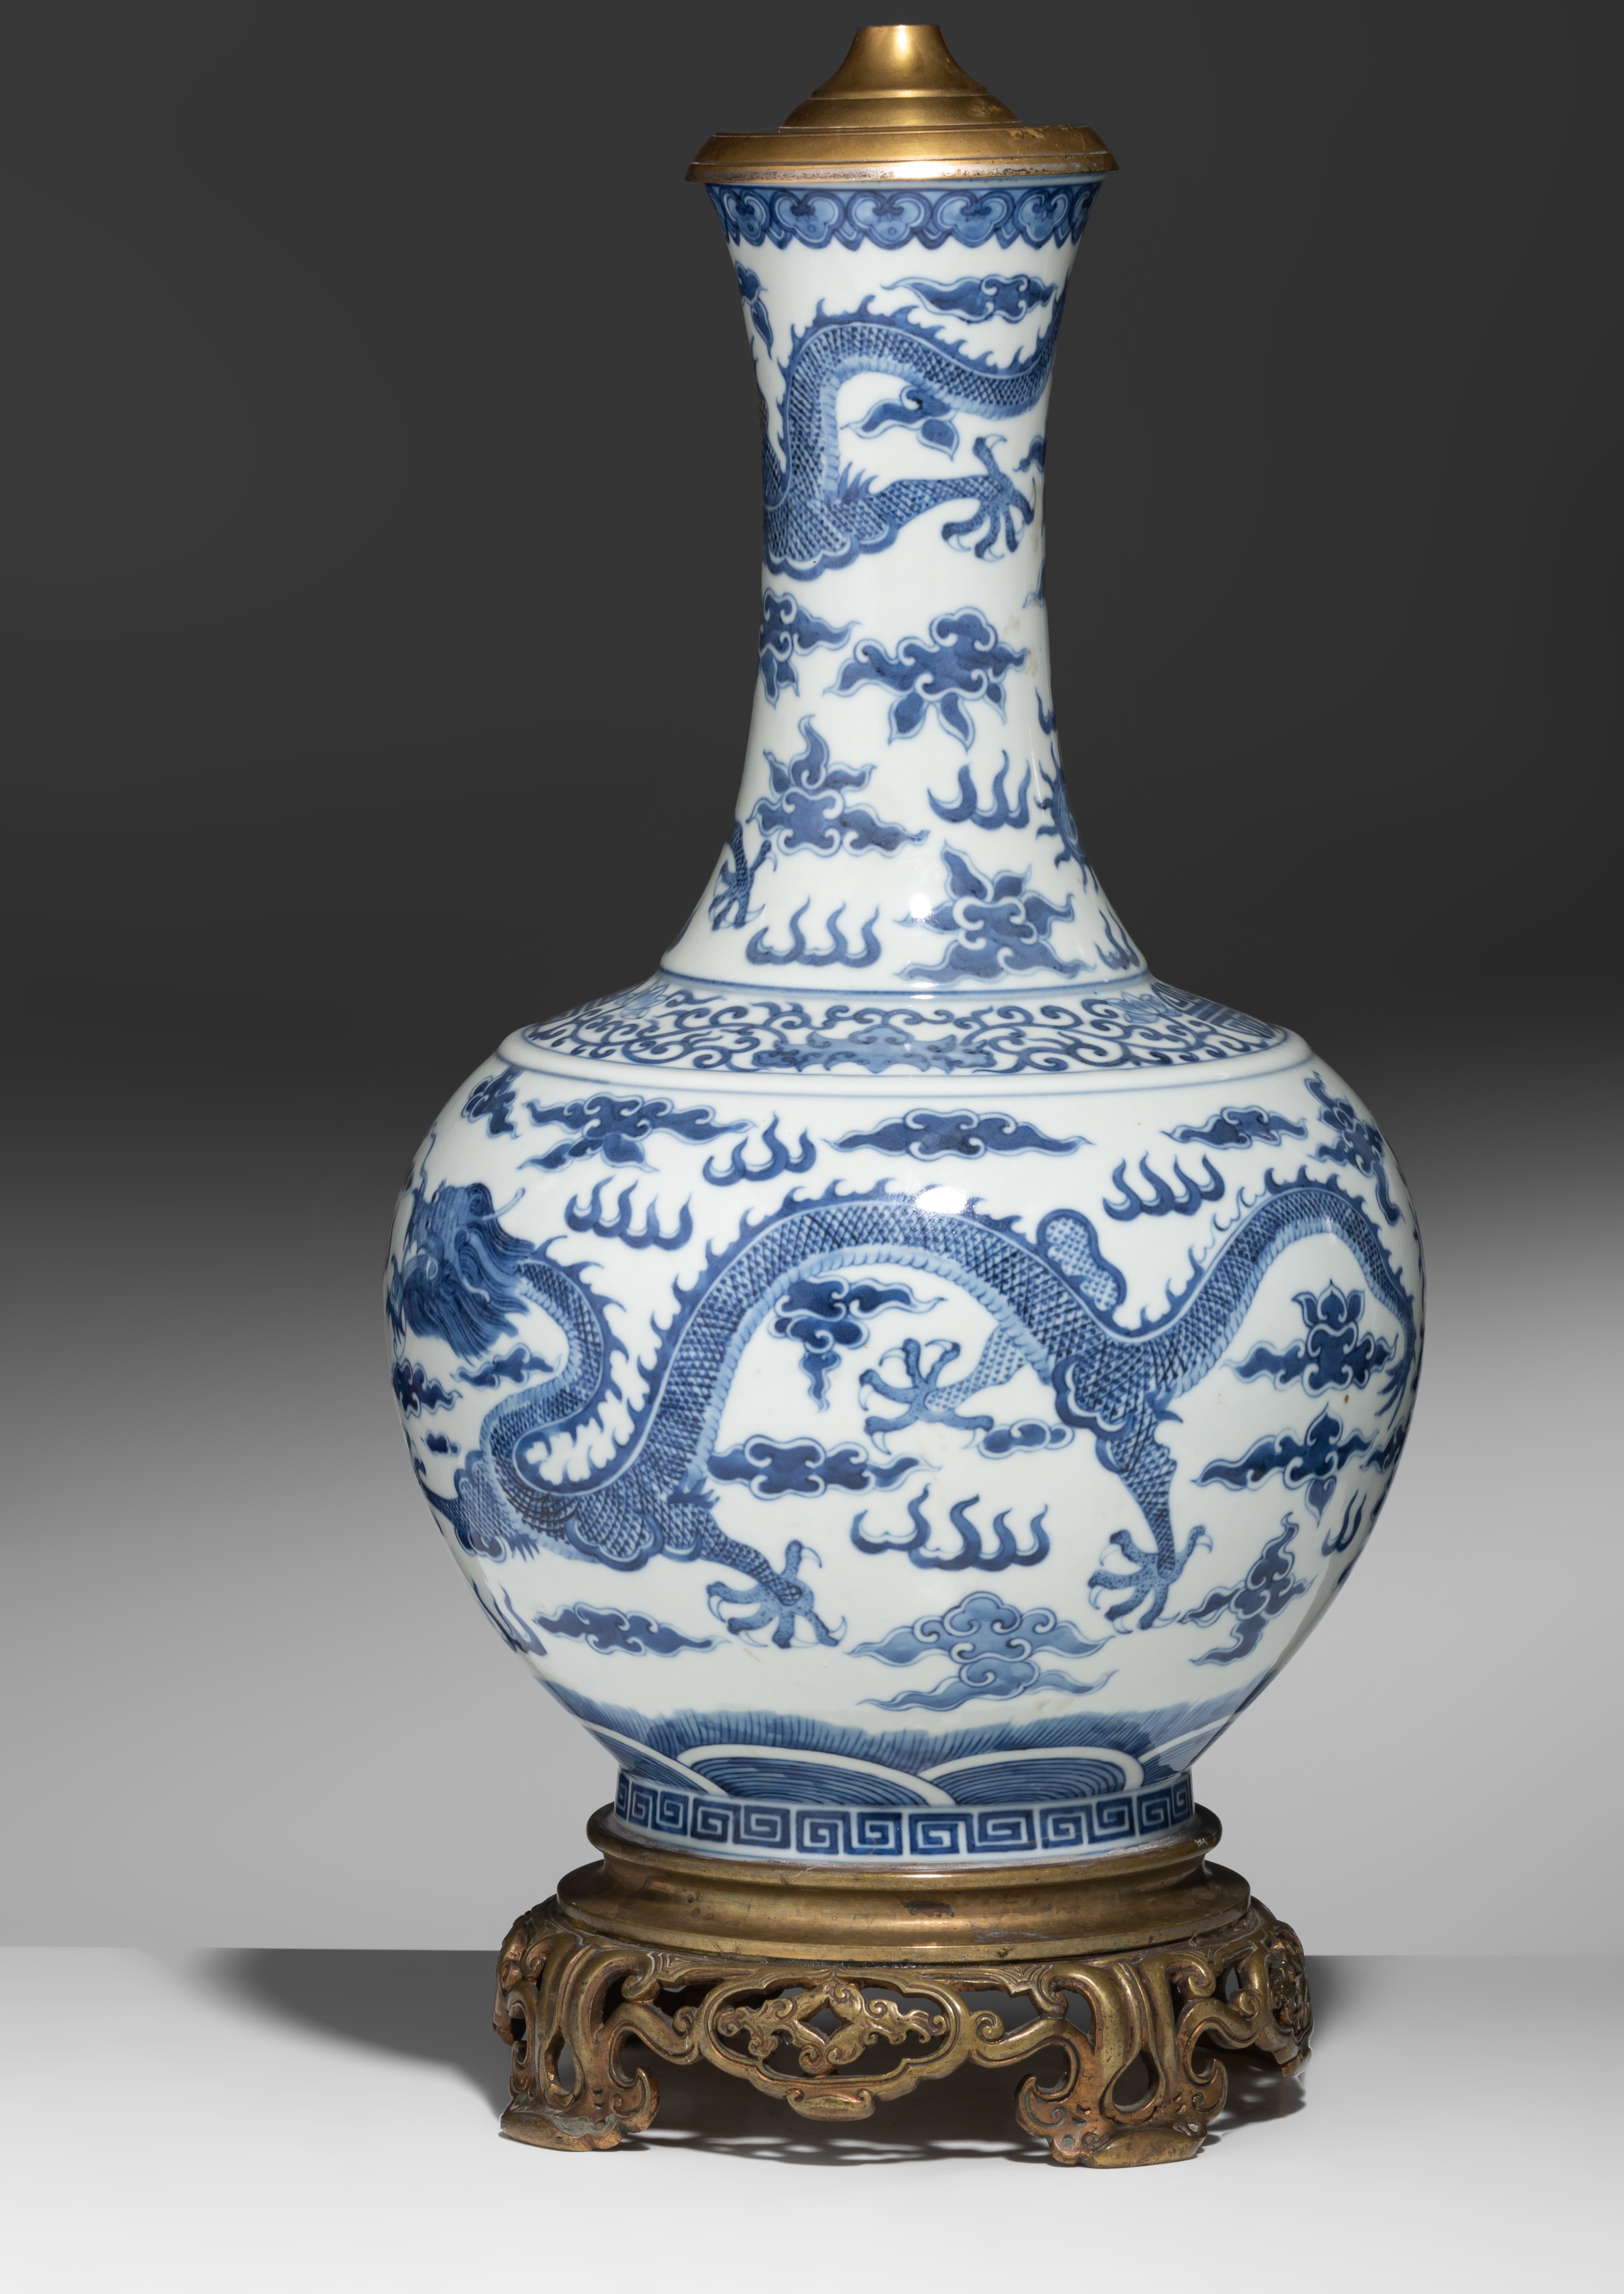 A Chinese blue and white 'Dragons' bottle vase and bronze mounts, with a Guangxu mark, Total H 50 cm - Image 5 of 8